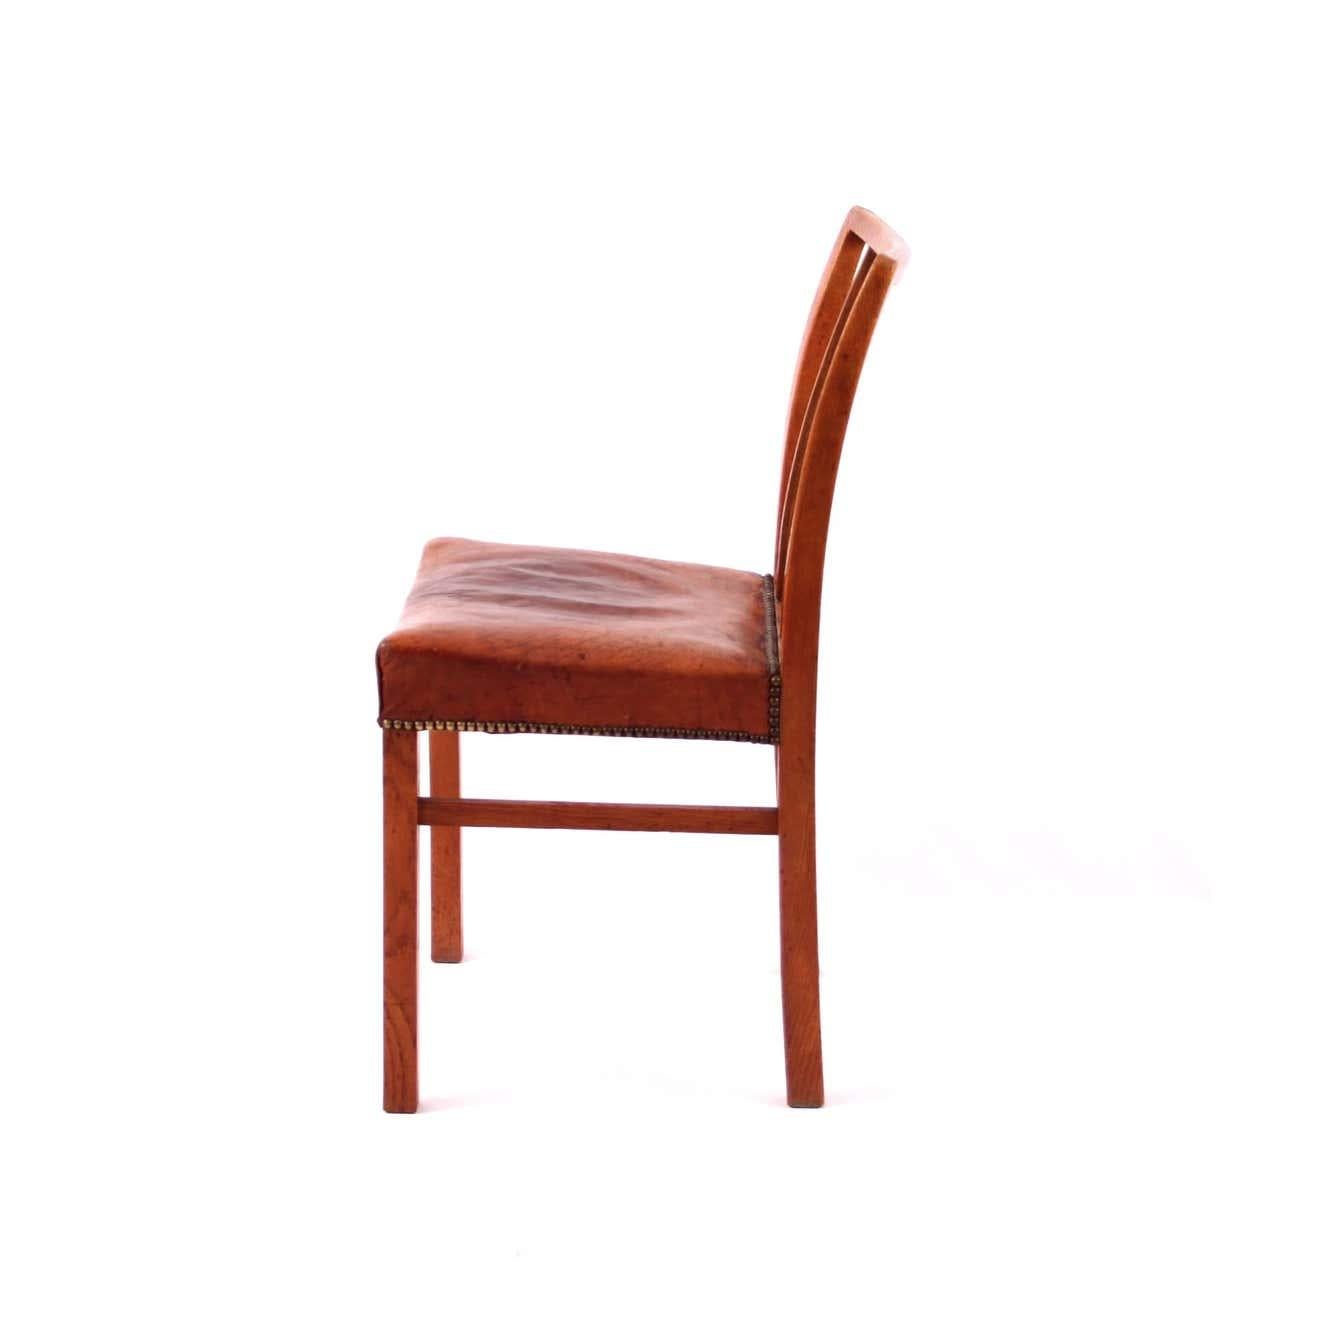 European Jacob Kjaer set of 6 dining chairs Oak and original Niger leather, 1930's For Sale